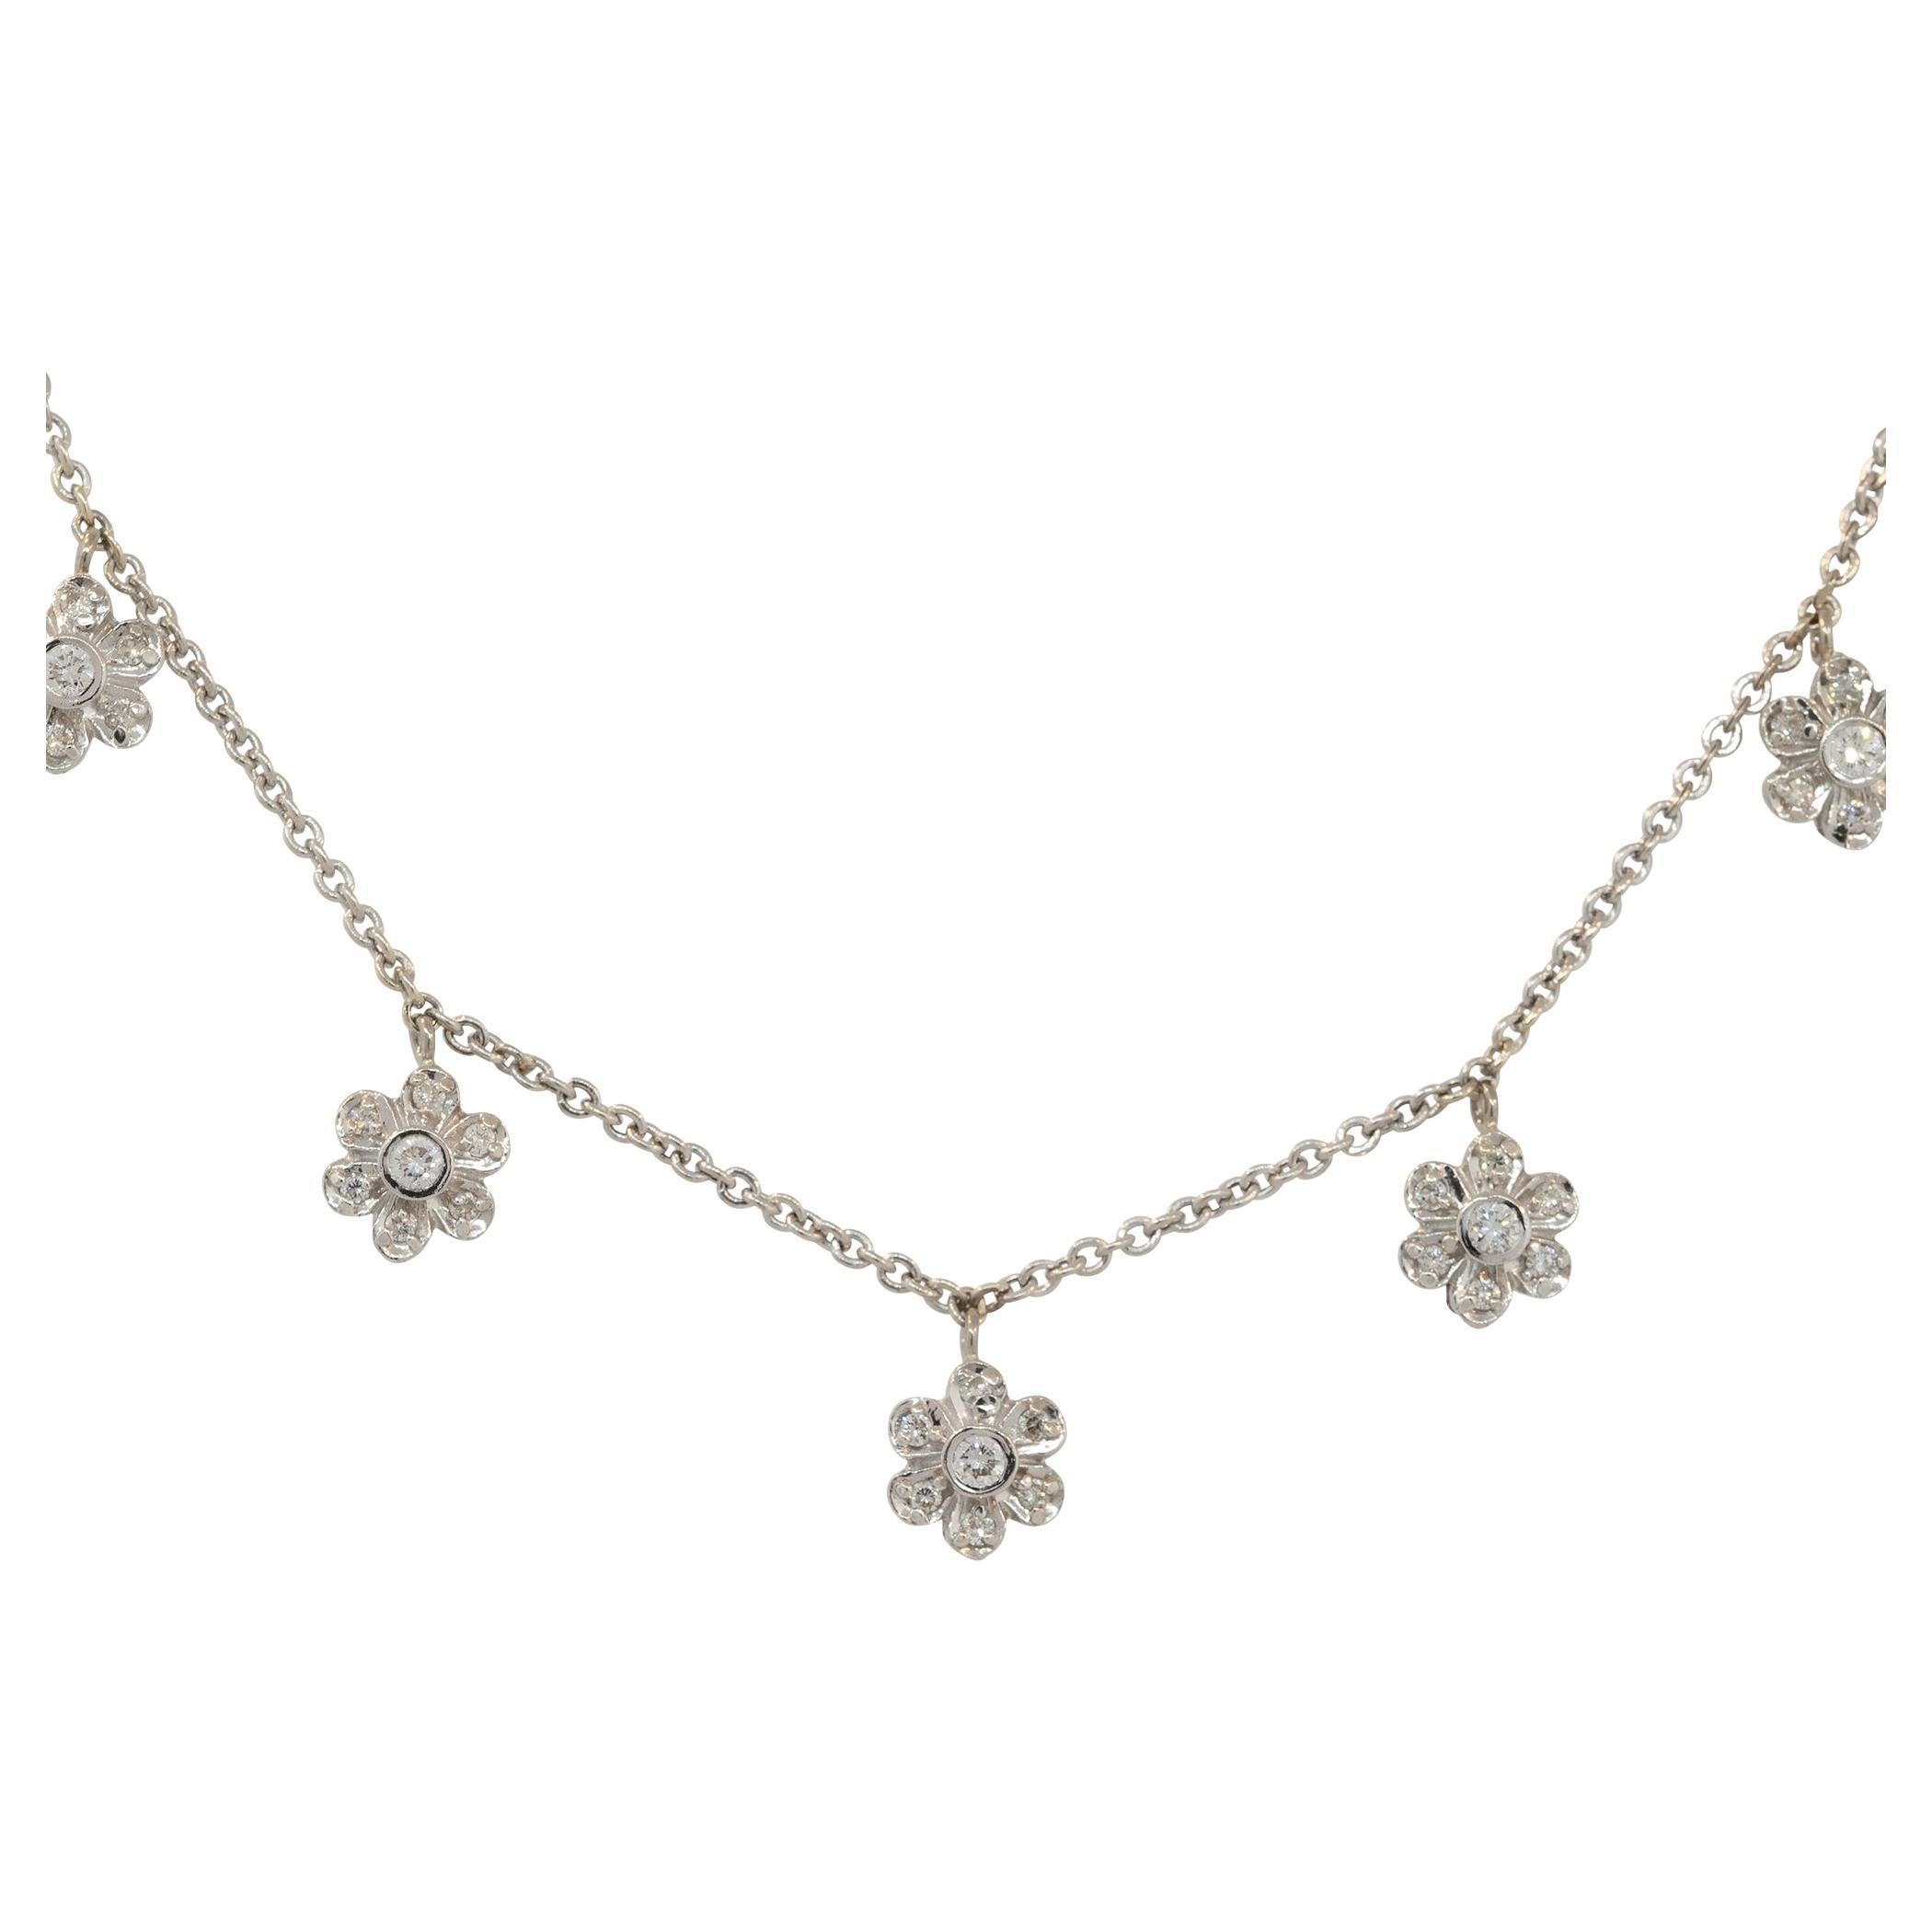 14k White Gold 0.40ctw Diamond Five Flower Necklace
Material: 14k White Gold
Diamond Details: Approximately 0.40ctw of Round Diamonds. Diamonds are G/H in color and VS in clarity
Total Weight: 6.4g (4.1dwt) 
Length: 15